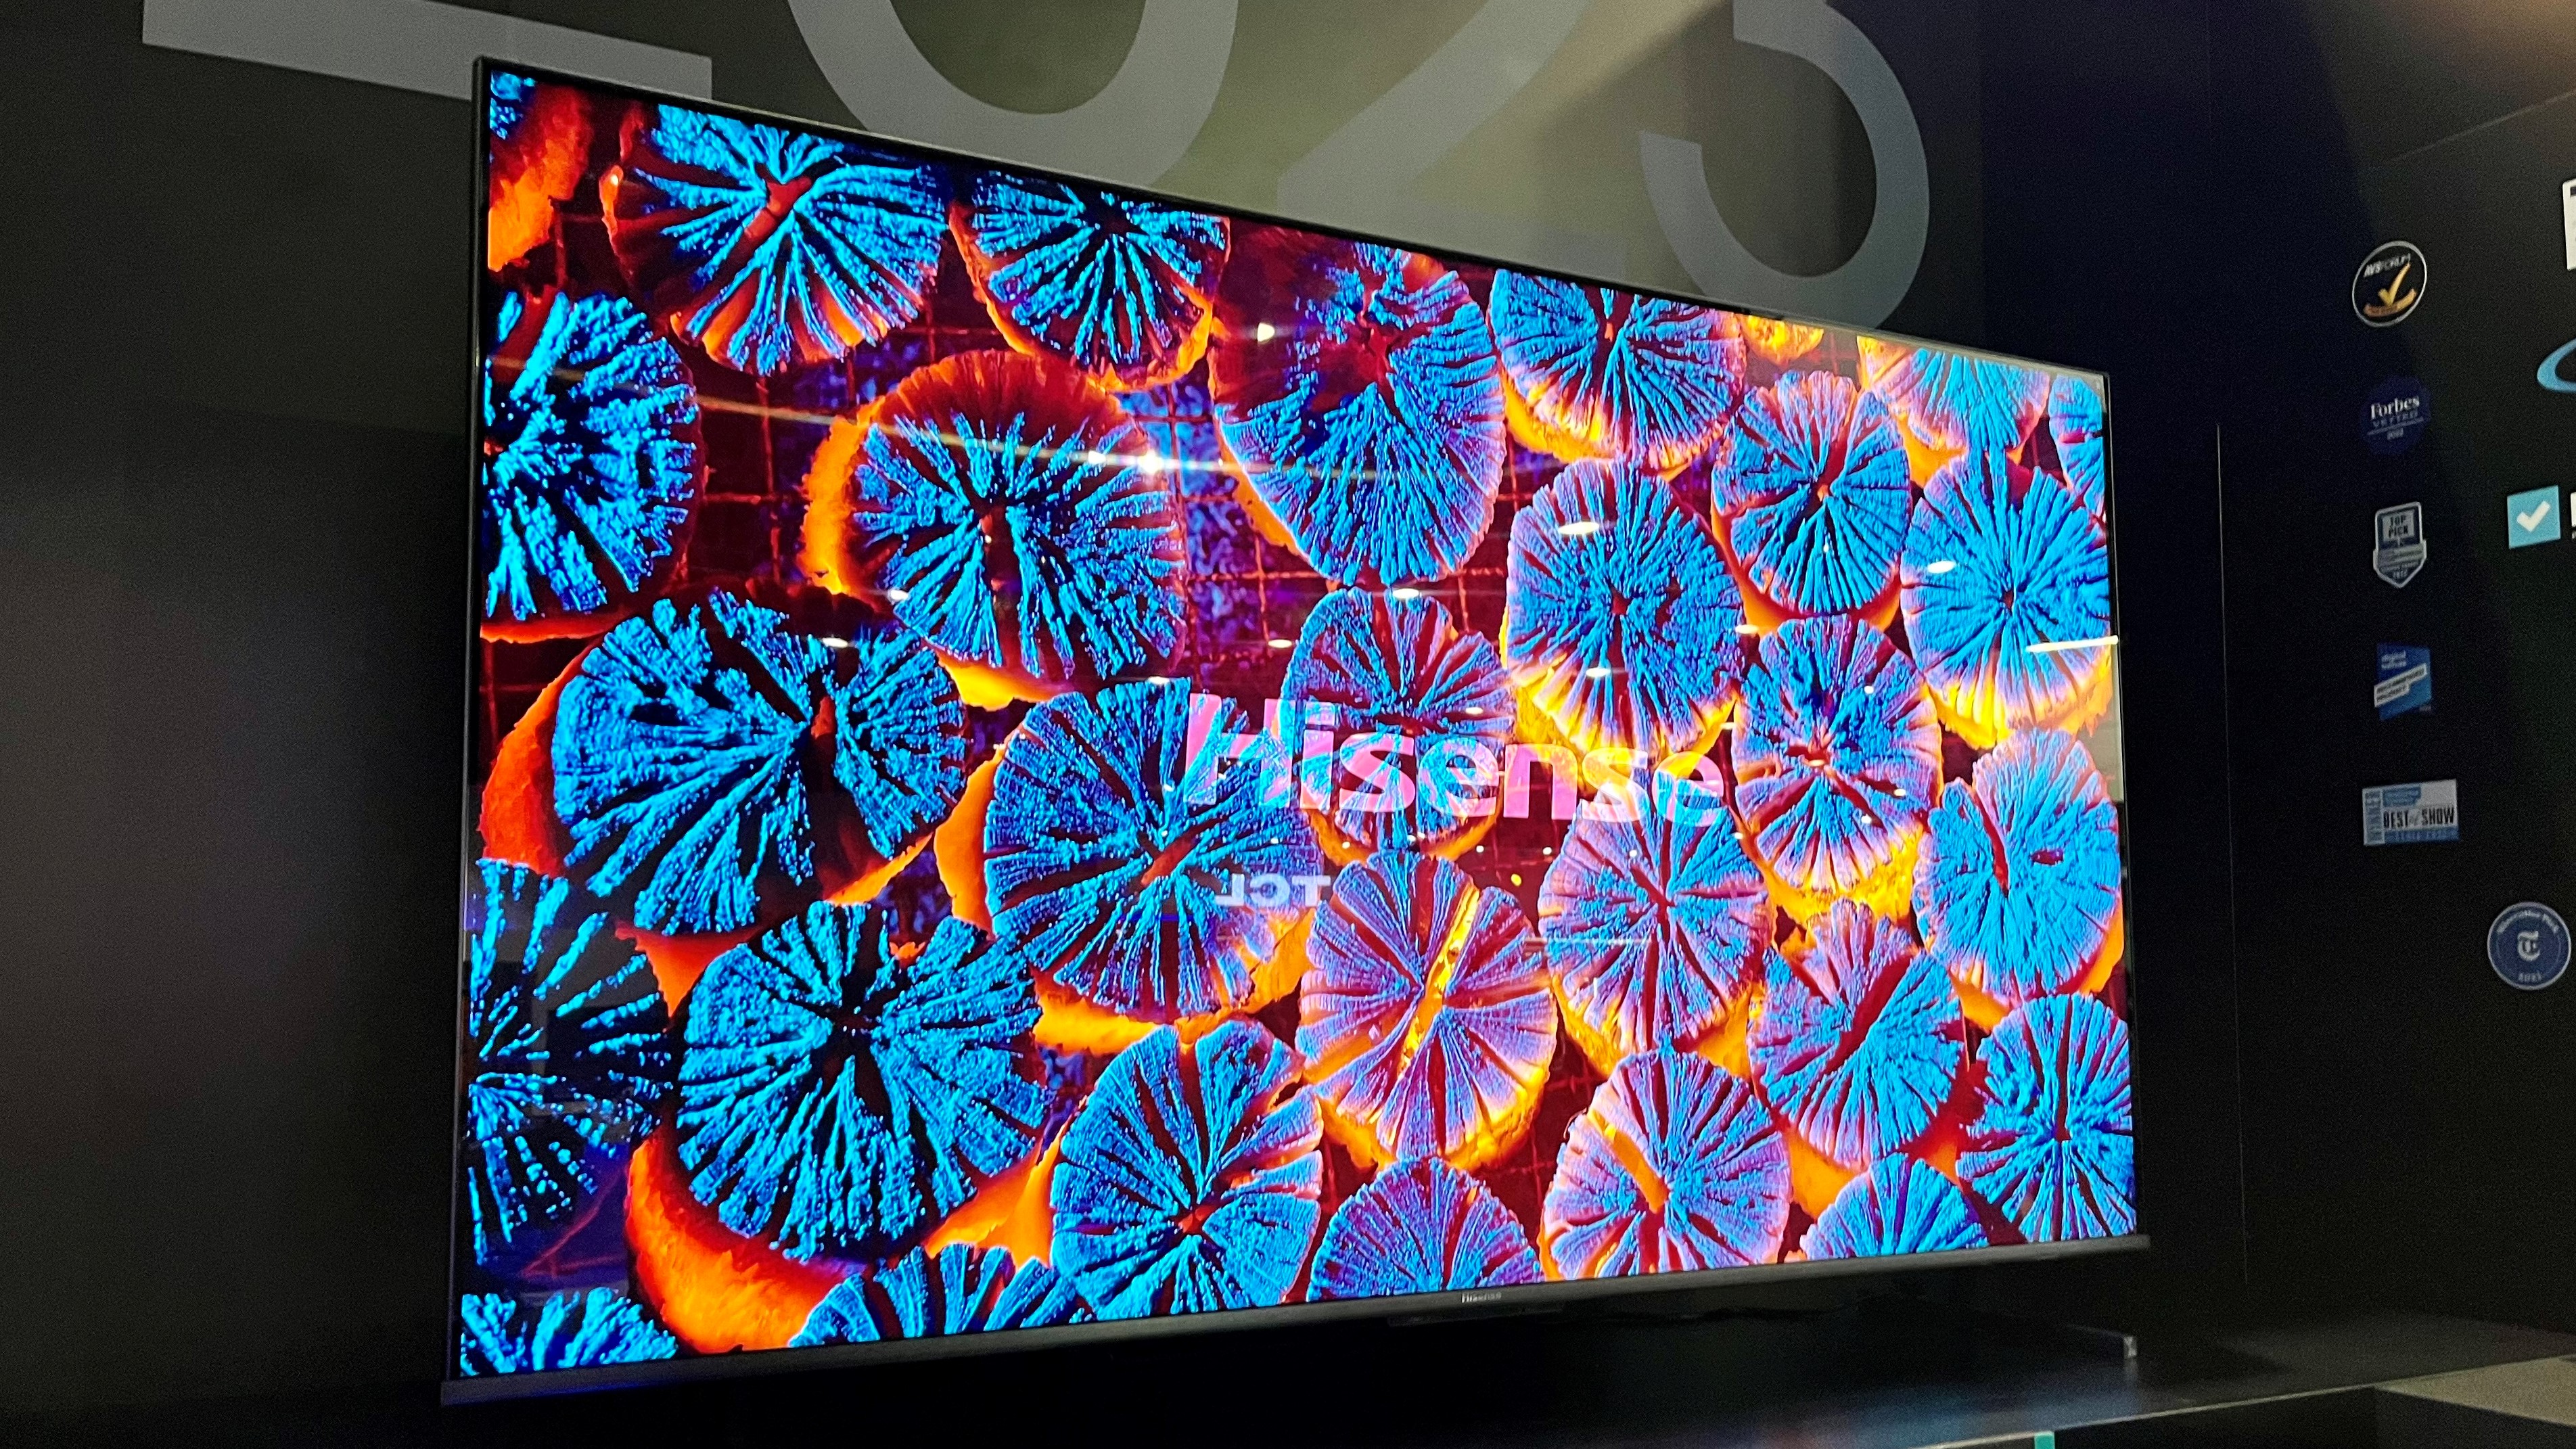 Hisense upstages TCL by adding a gigantic 100-inch mini-LED TV